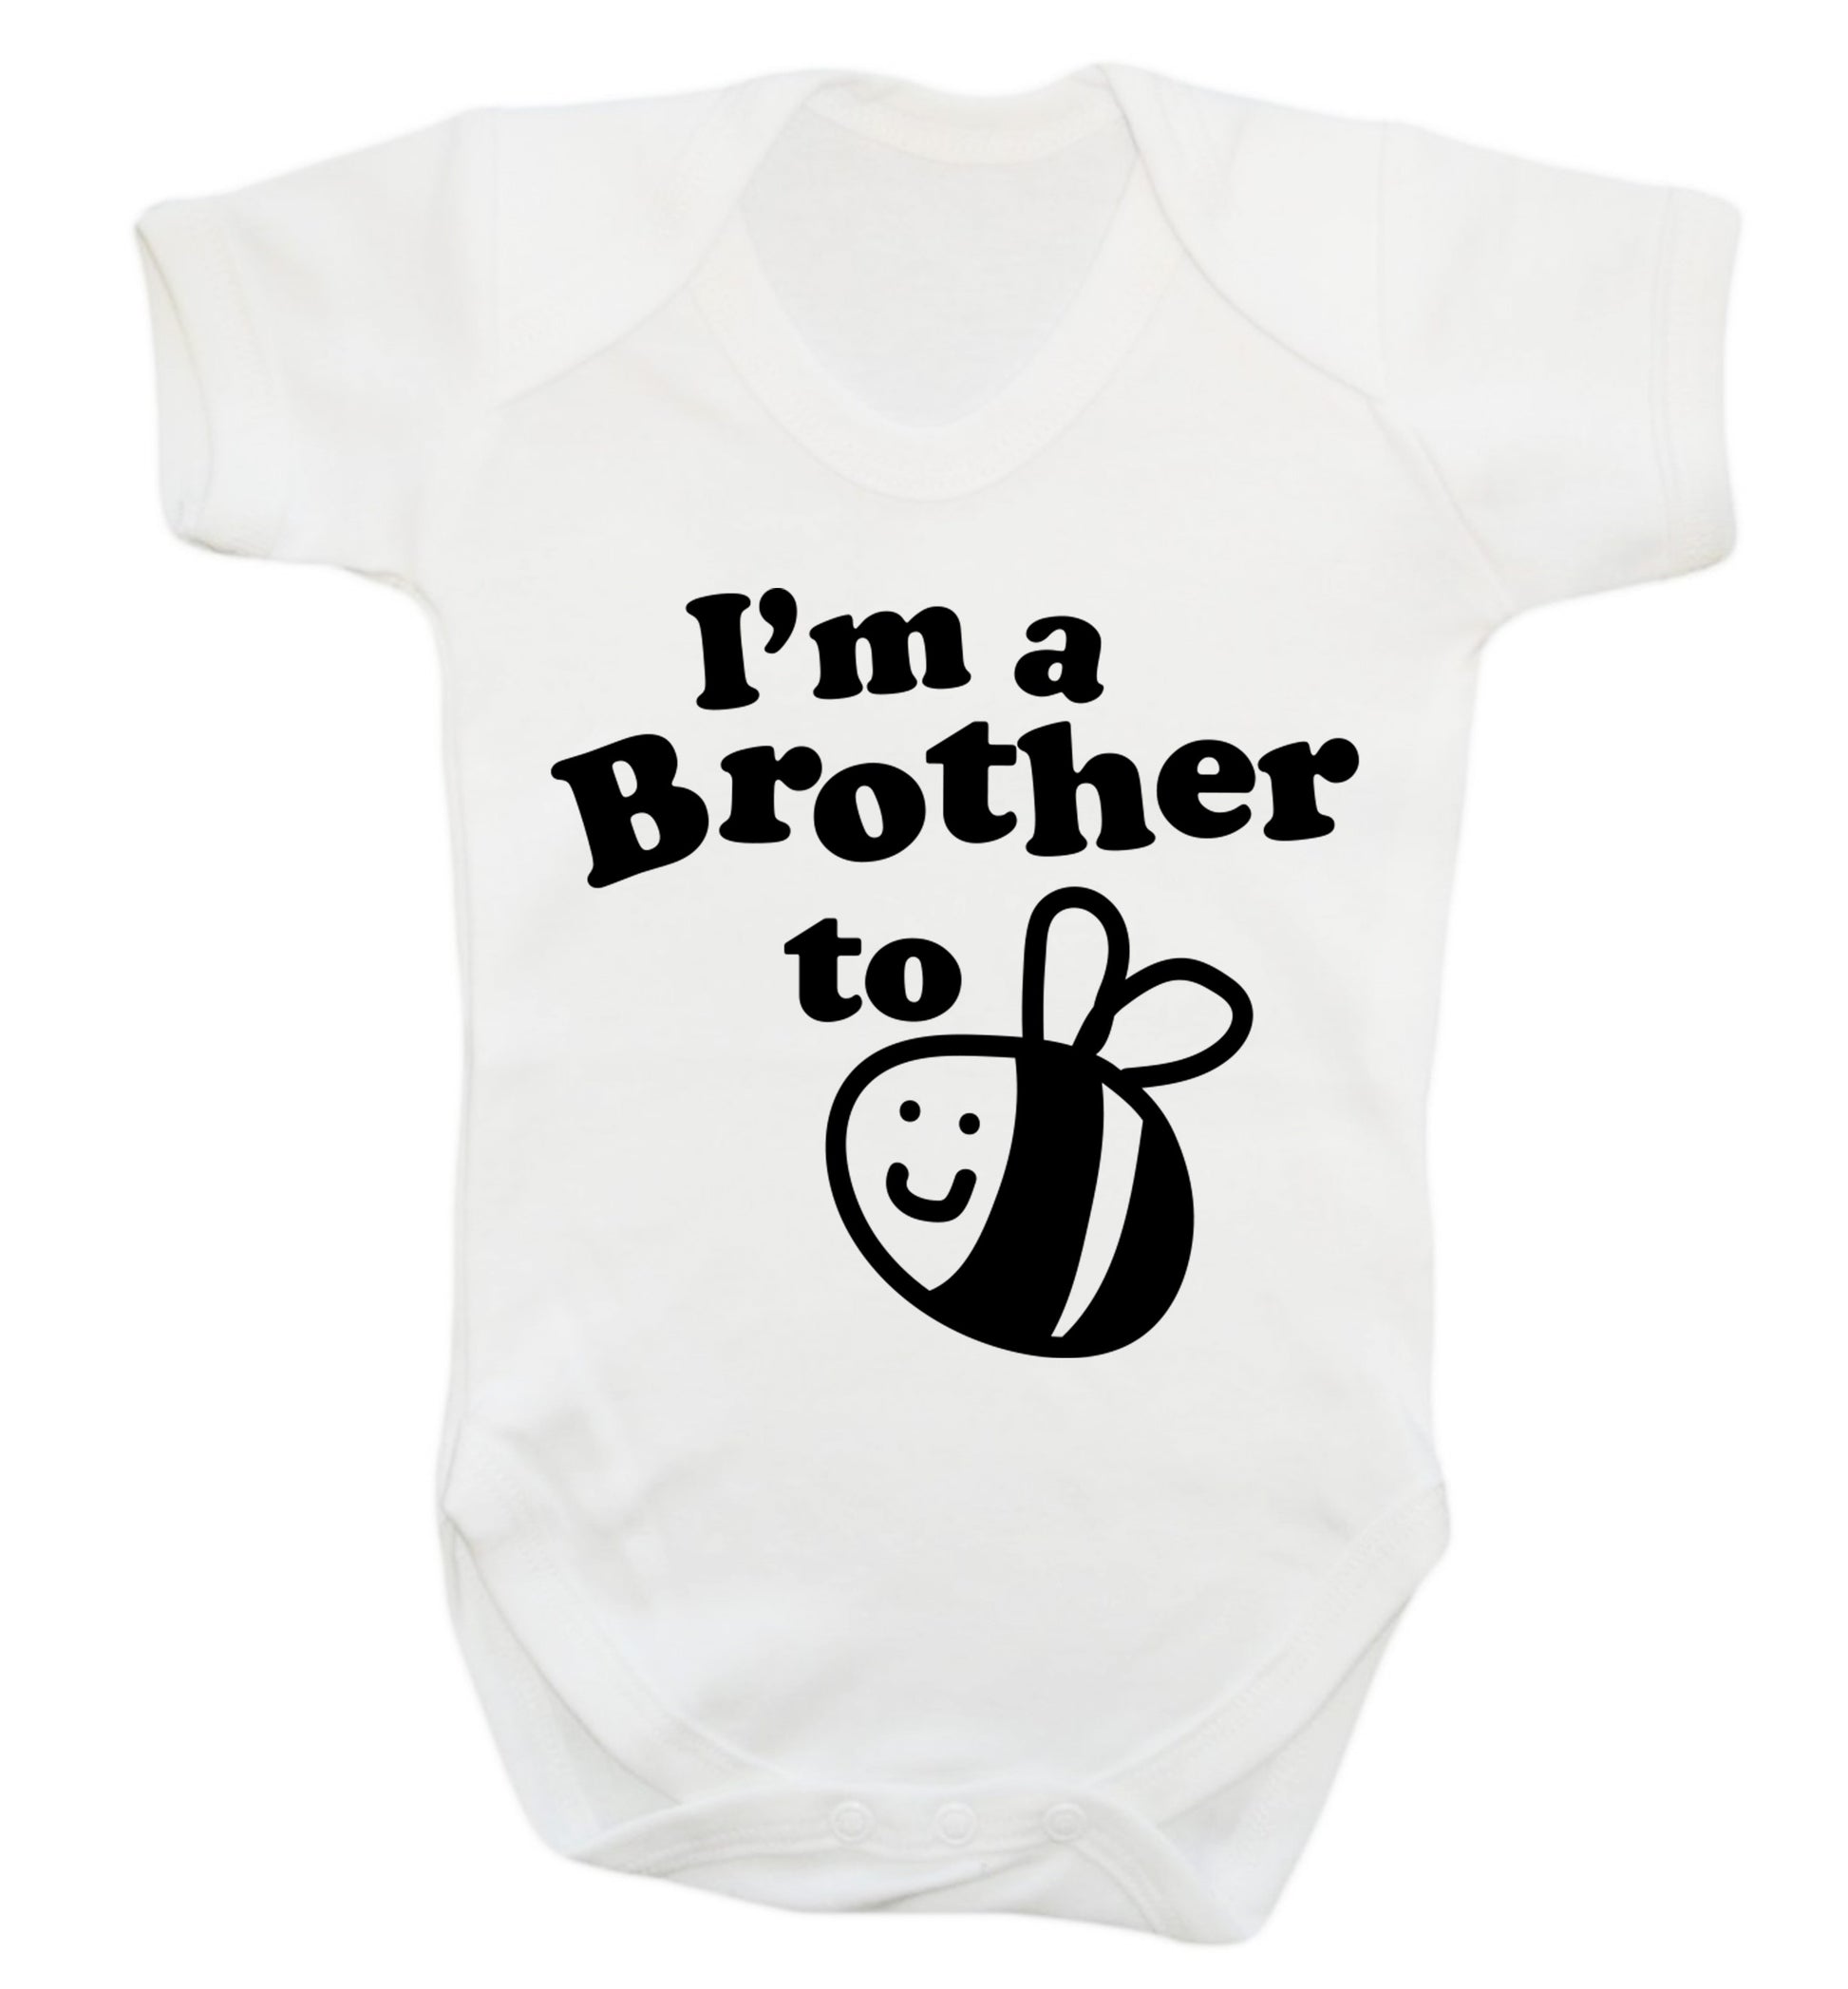 I'm a brother to be Baby Vest white 18-24 months